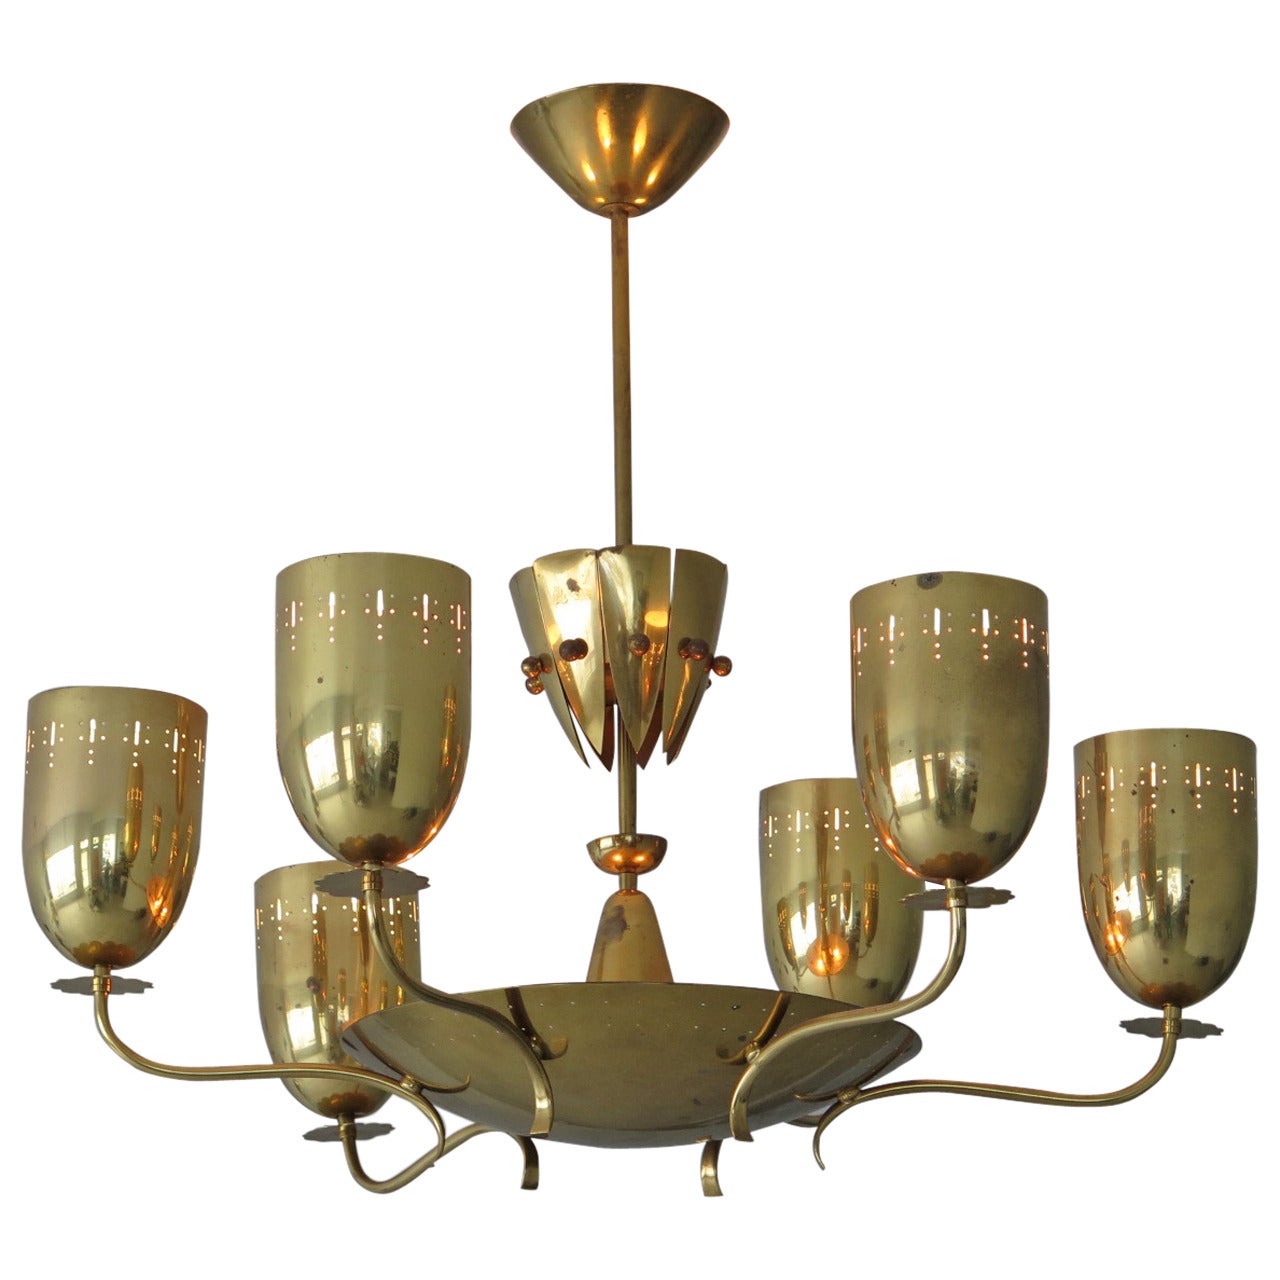 Large German Chandelier in Polished Brass, circa 1950s For Sale